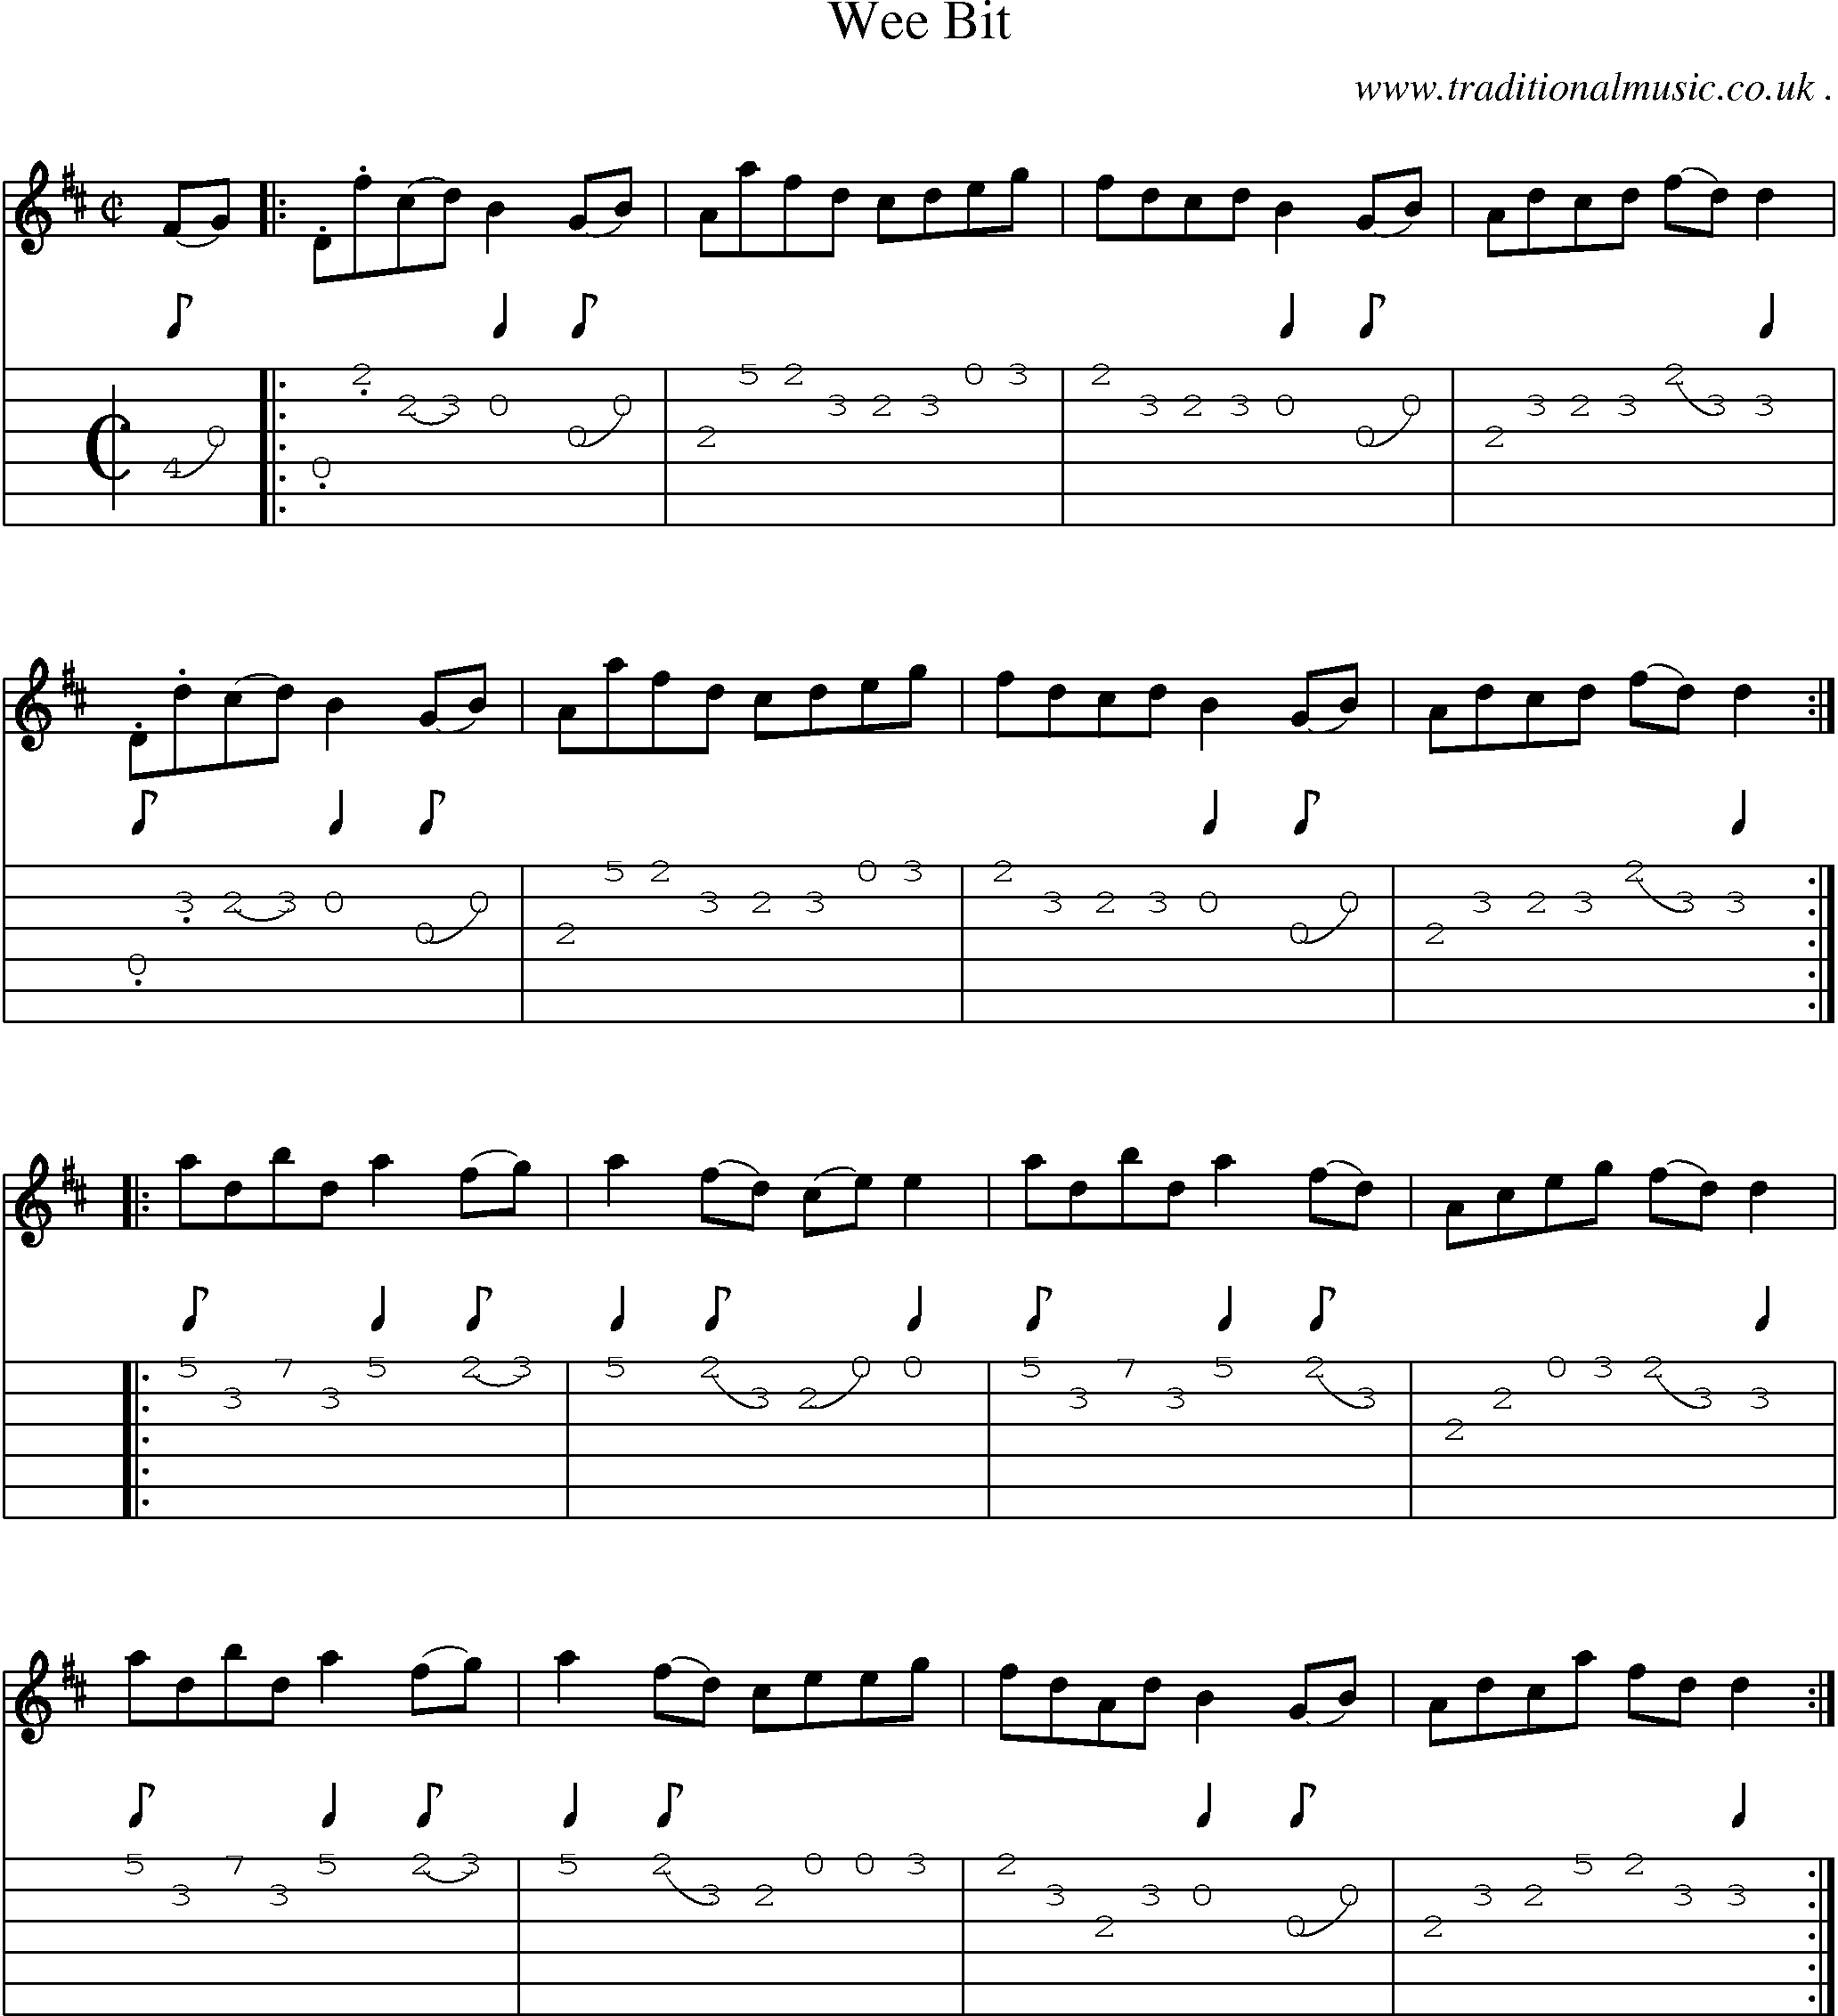 Sheet-Music and Guitar Tabs for Wee Bit